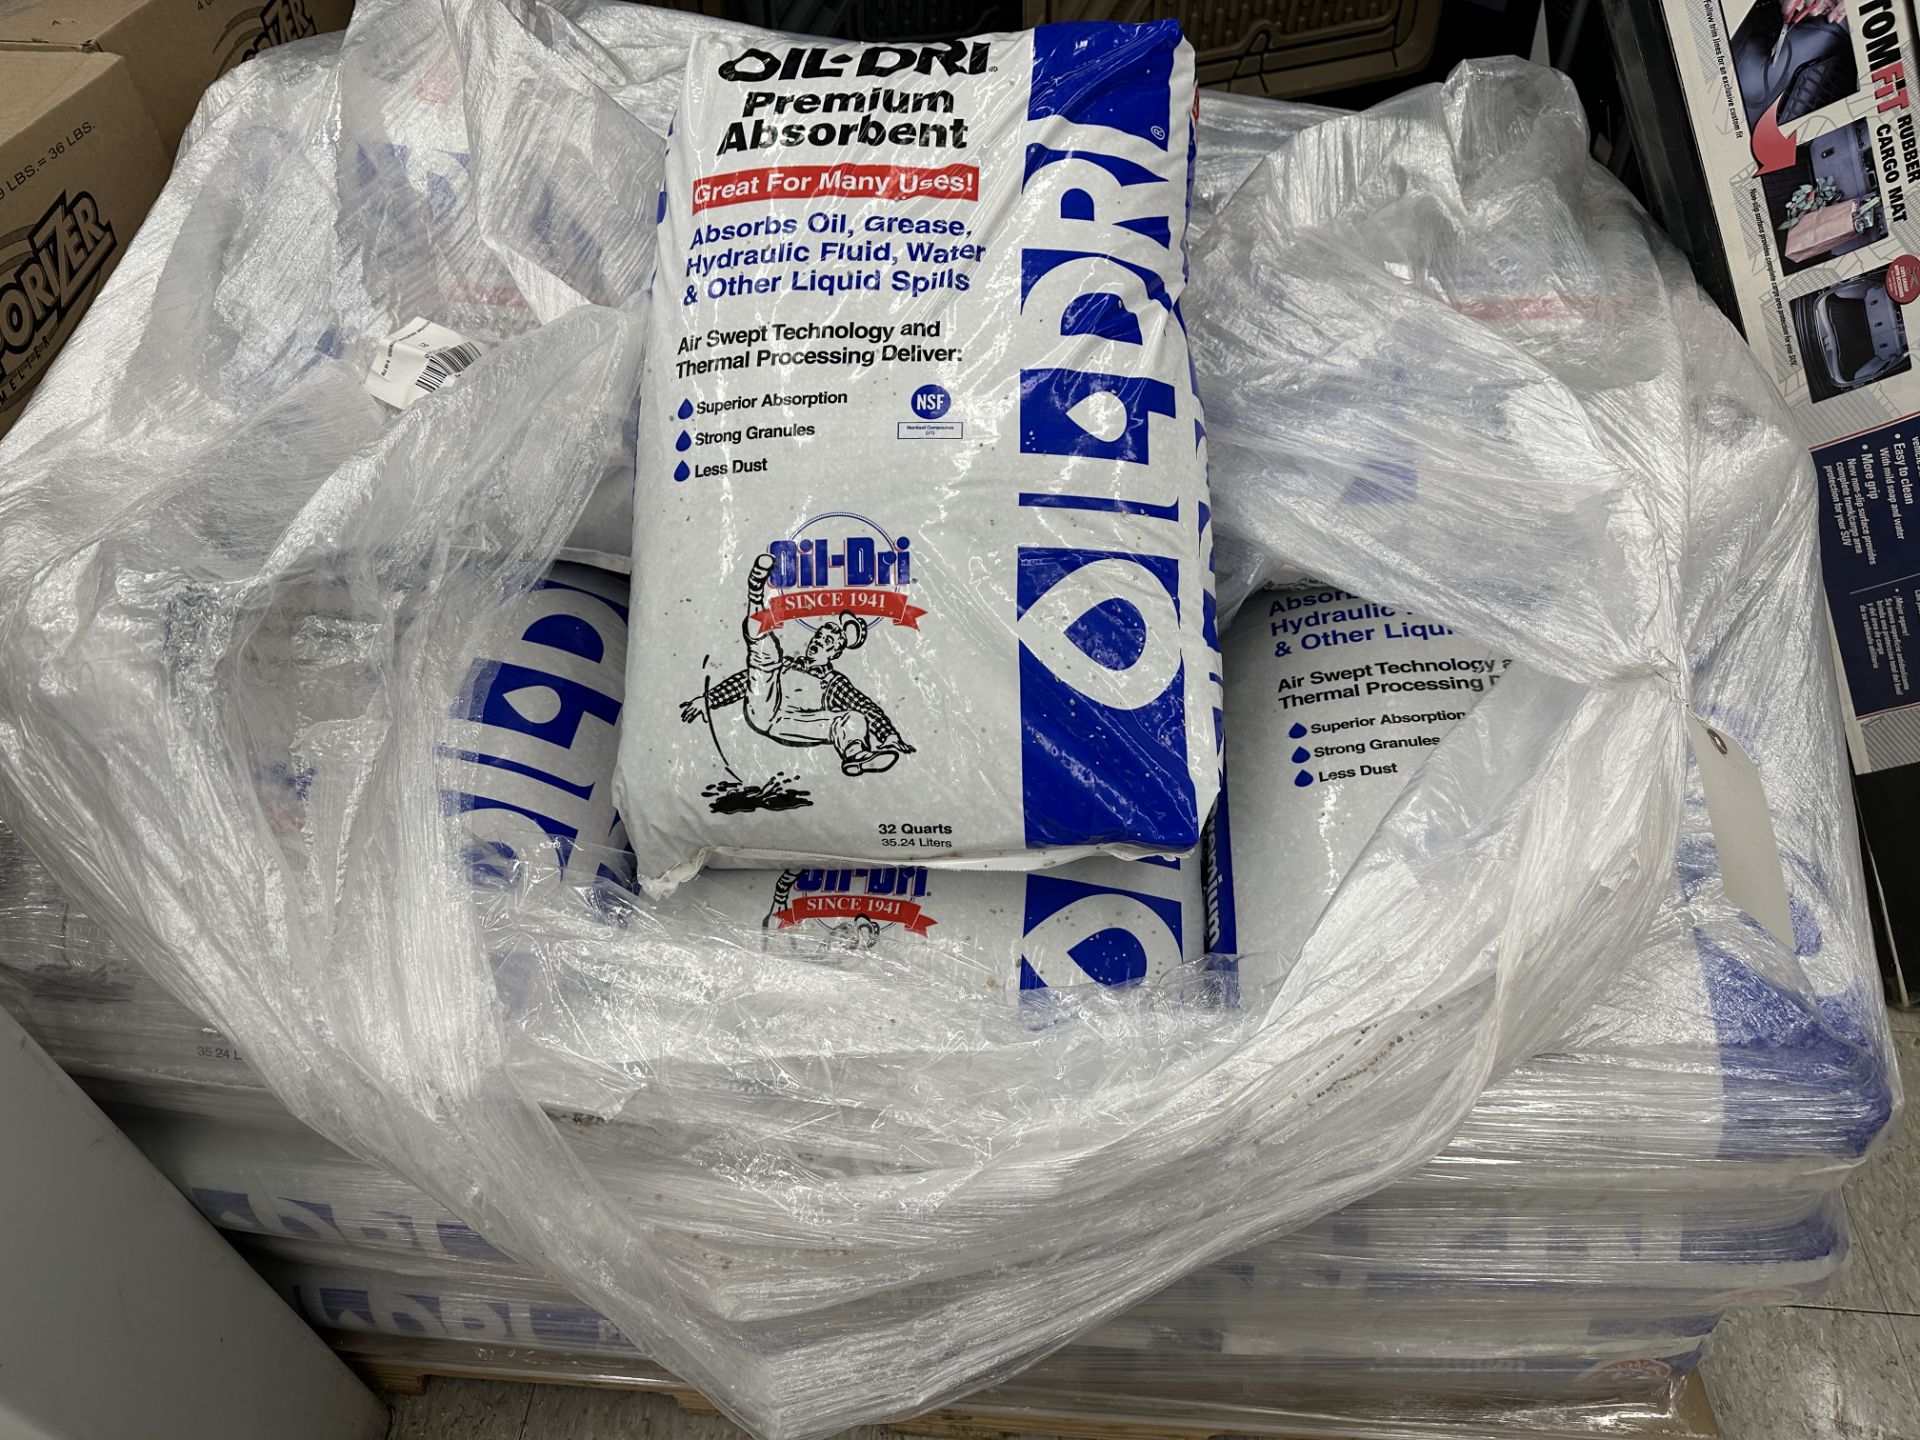 (24) Oil-Dri 32 Quart Bags of Speedy Dry/Fluid Absorbent (BEING SOLD BY THE PIECE)